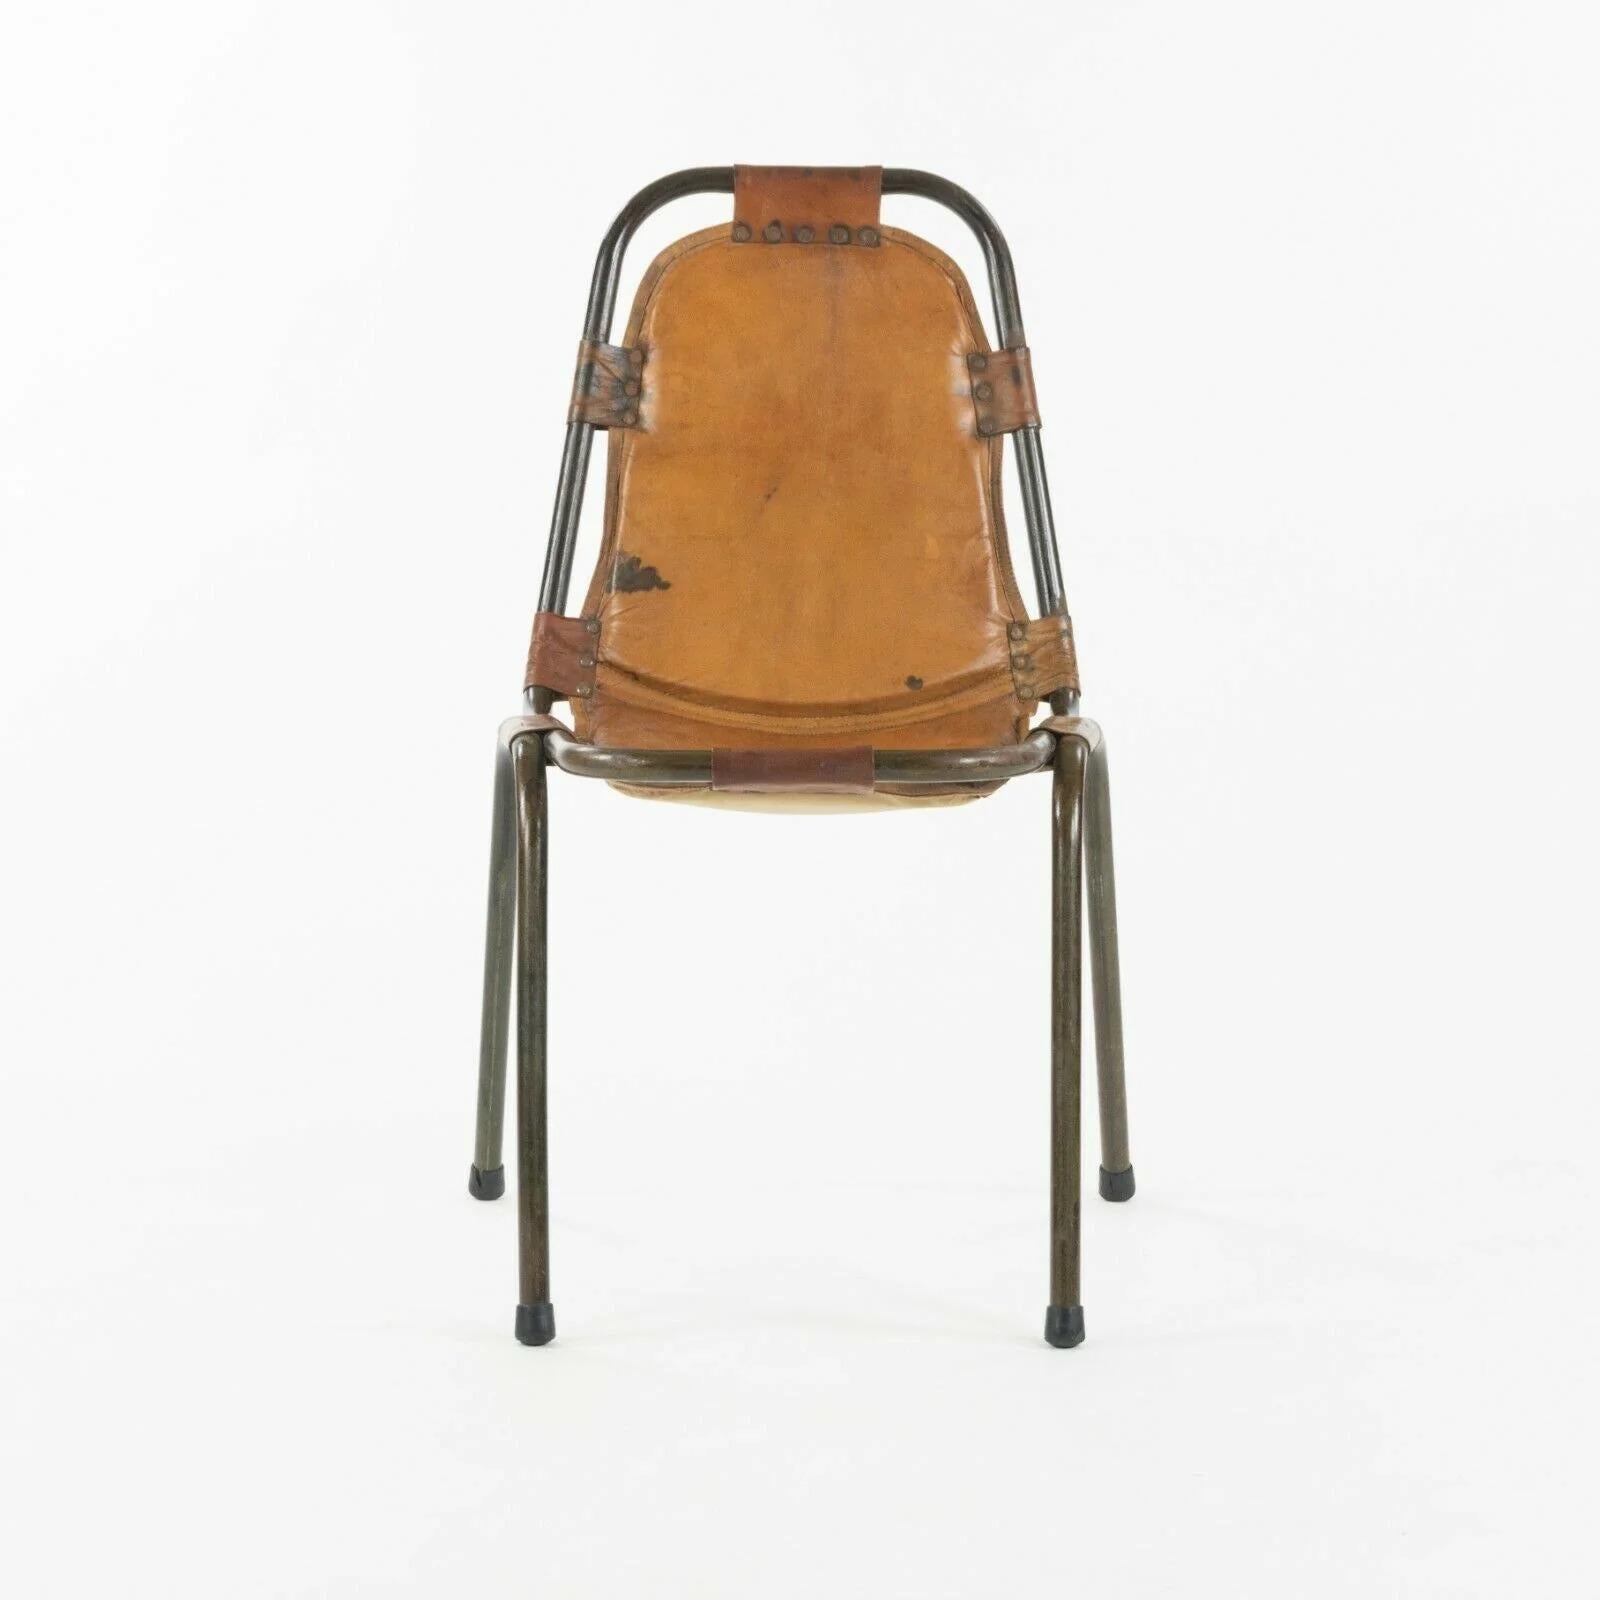 Modern 1960s Dal Vera Stacking Chairs for Charlotte Perriand Les Arcs Resort Set of 6 For Sale